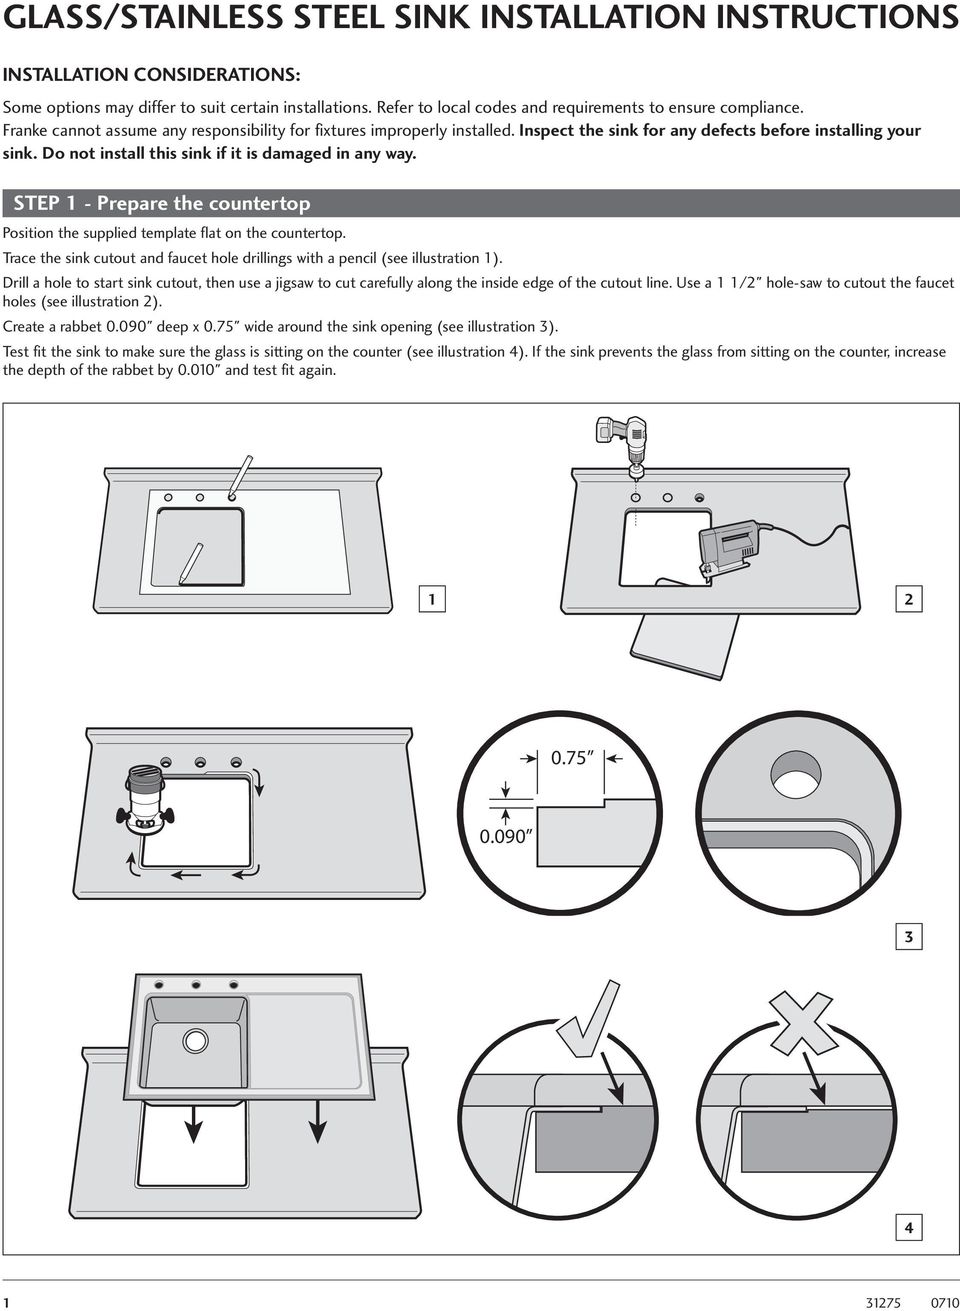 STEP 1 - Prepare the countertop Position the supplied template flat on the countertop. Trace the sink cutout and faucet hole drillings with a pencil (see illustration 1).